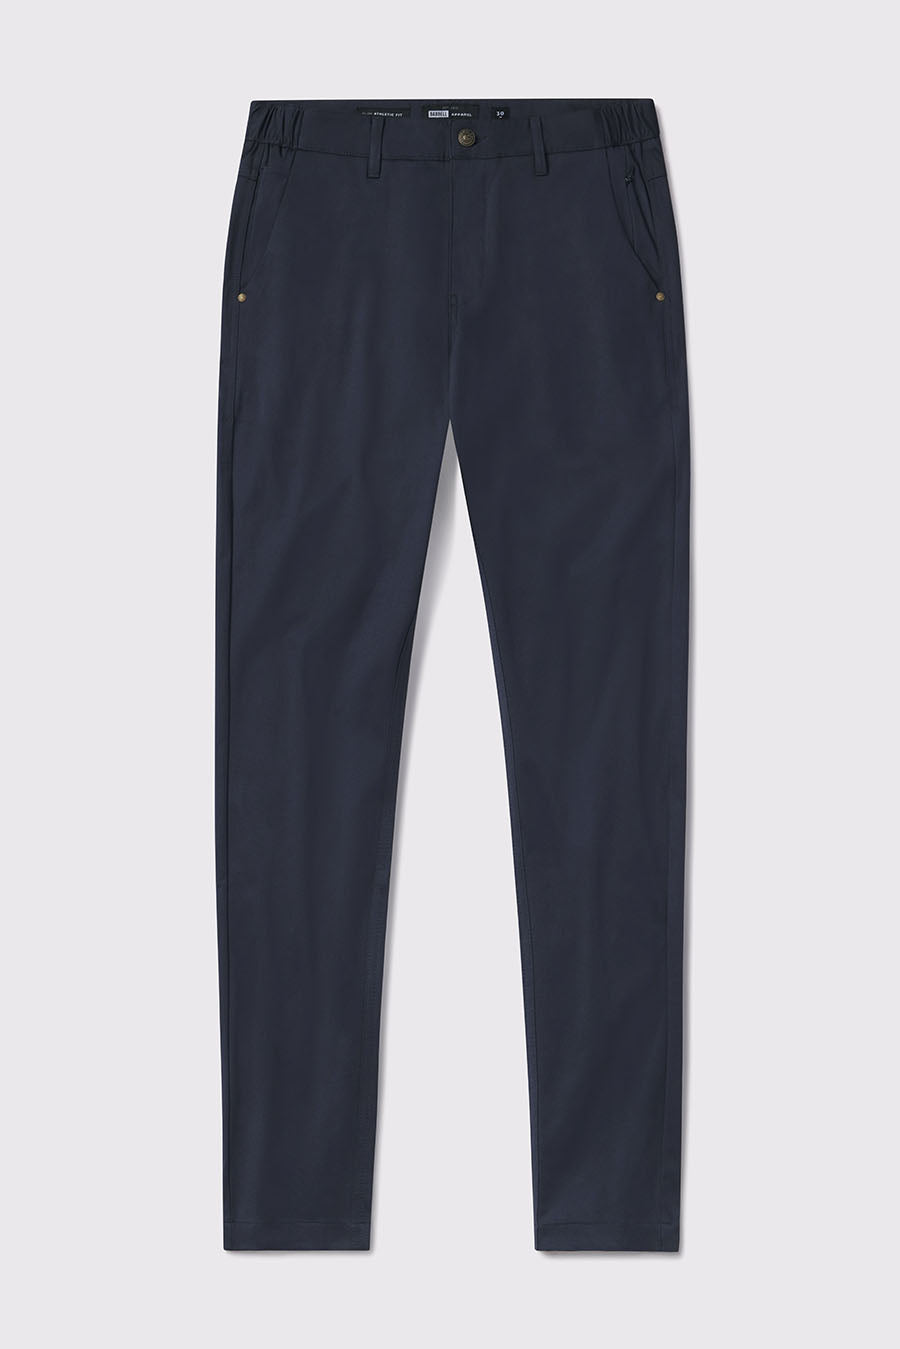 Anything Dress Pant Slim - Navy - photo from front flat lay #color_navy